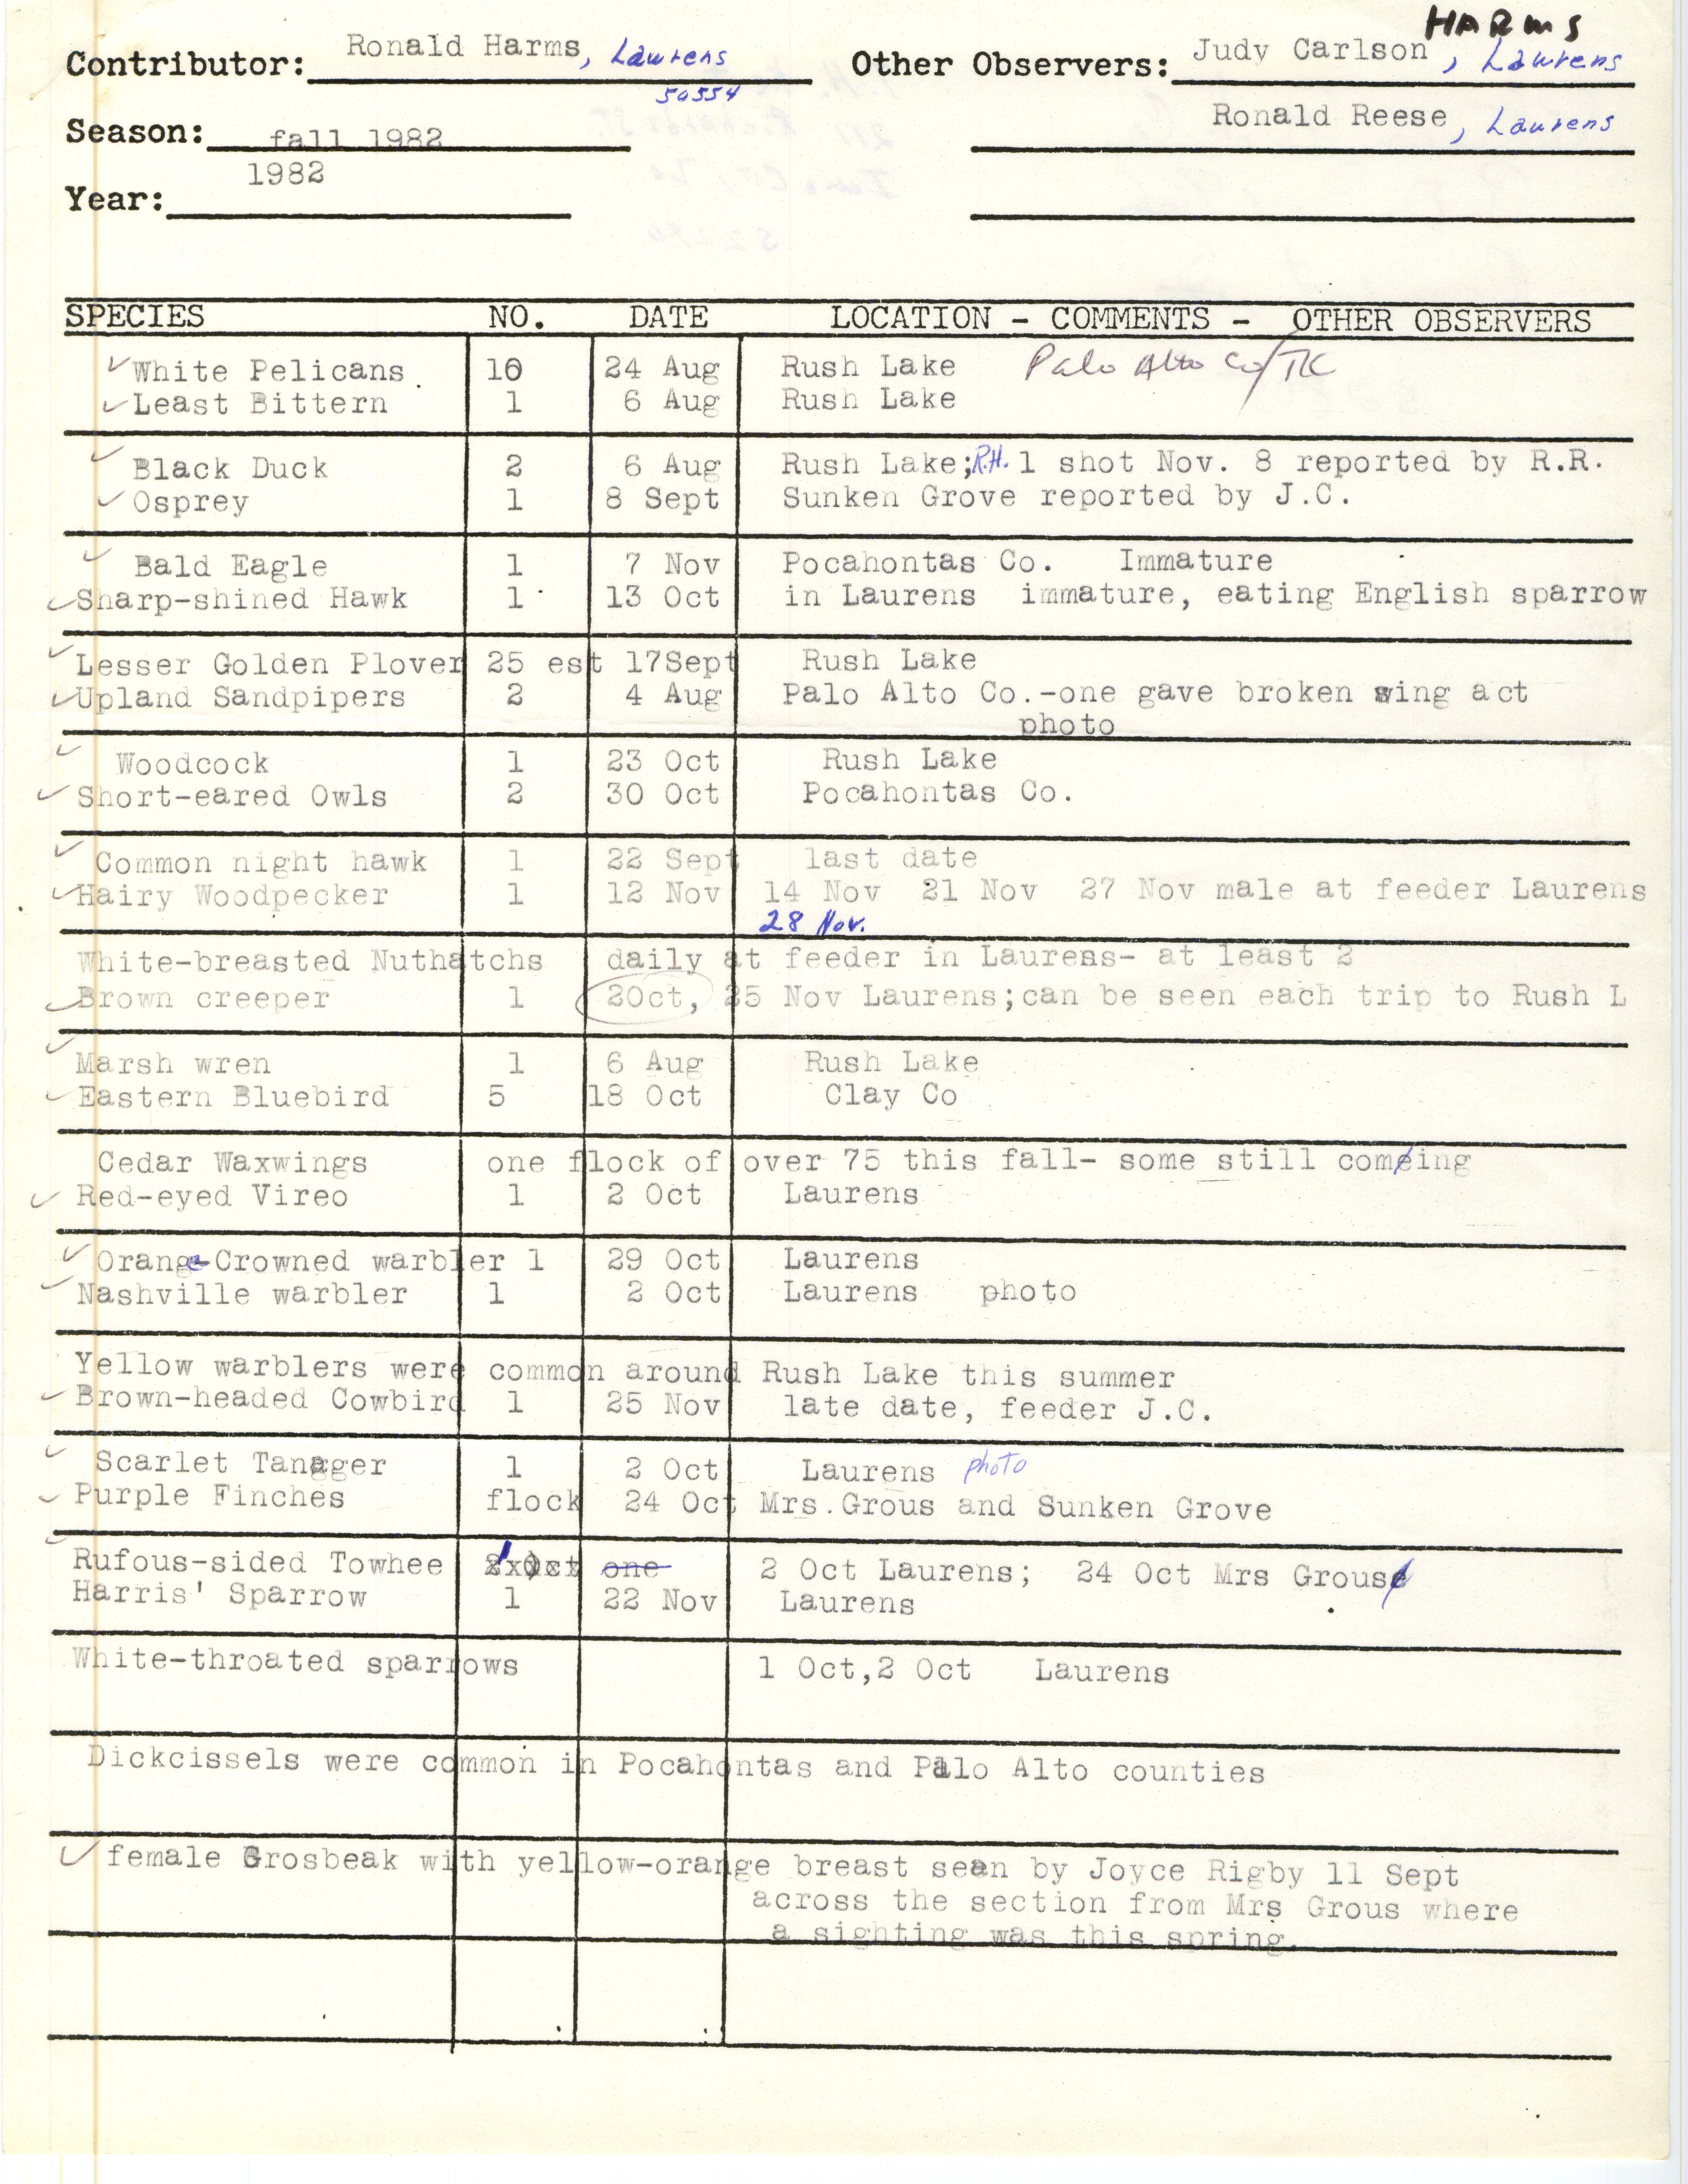 Field report contributed by Ronald Harms for fall 1982